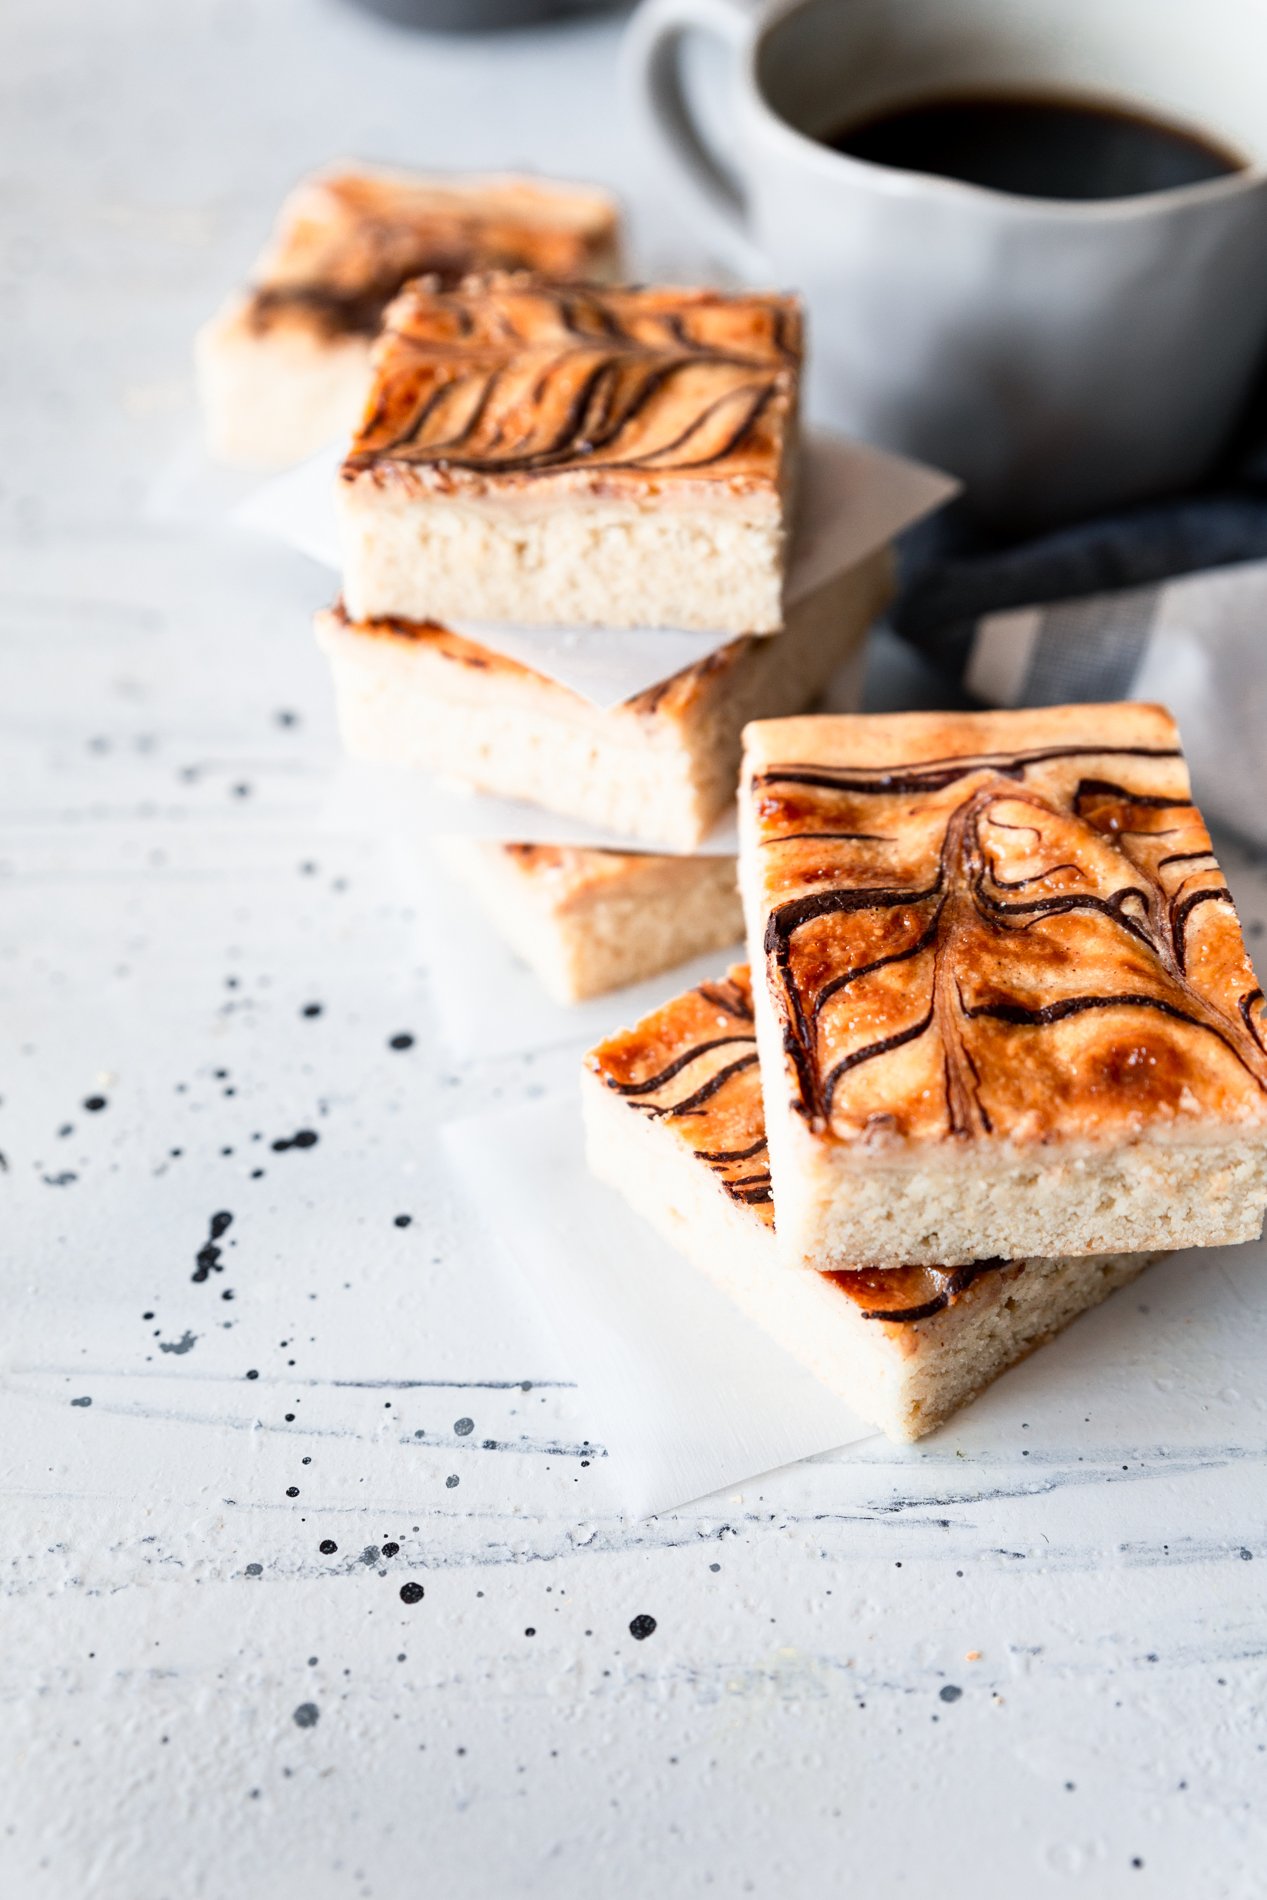 forty-five degree angled view of churro cheesecake cookie bars with dulce de leche and dark chocolate ribbons. Slices are staked on top of each other on a white background, with a cup of coffee to the upper right of the image on a blue cloth.